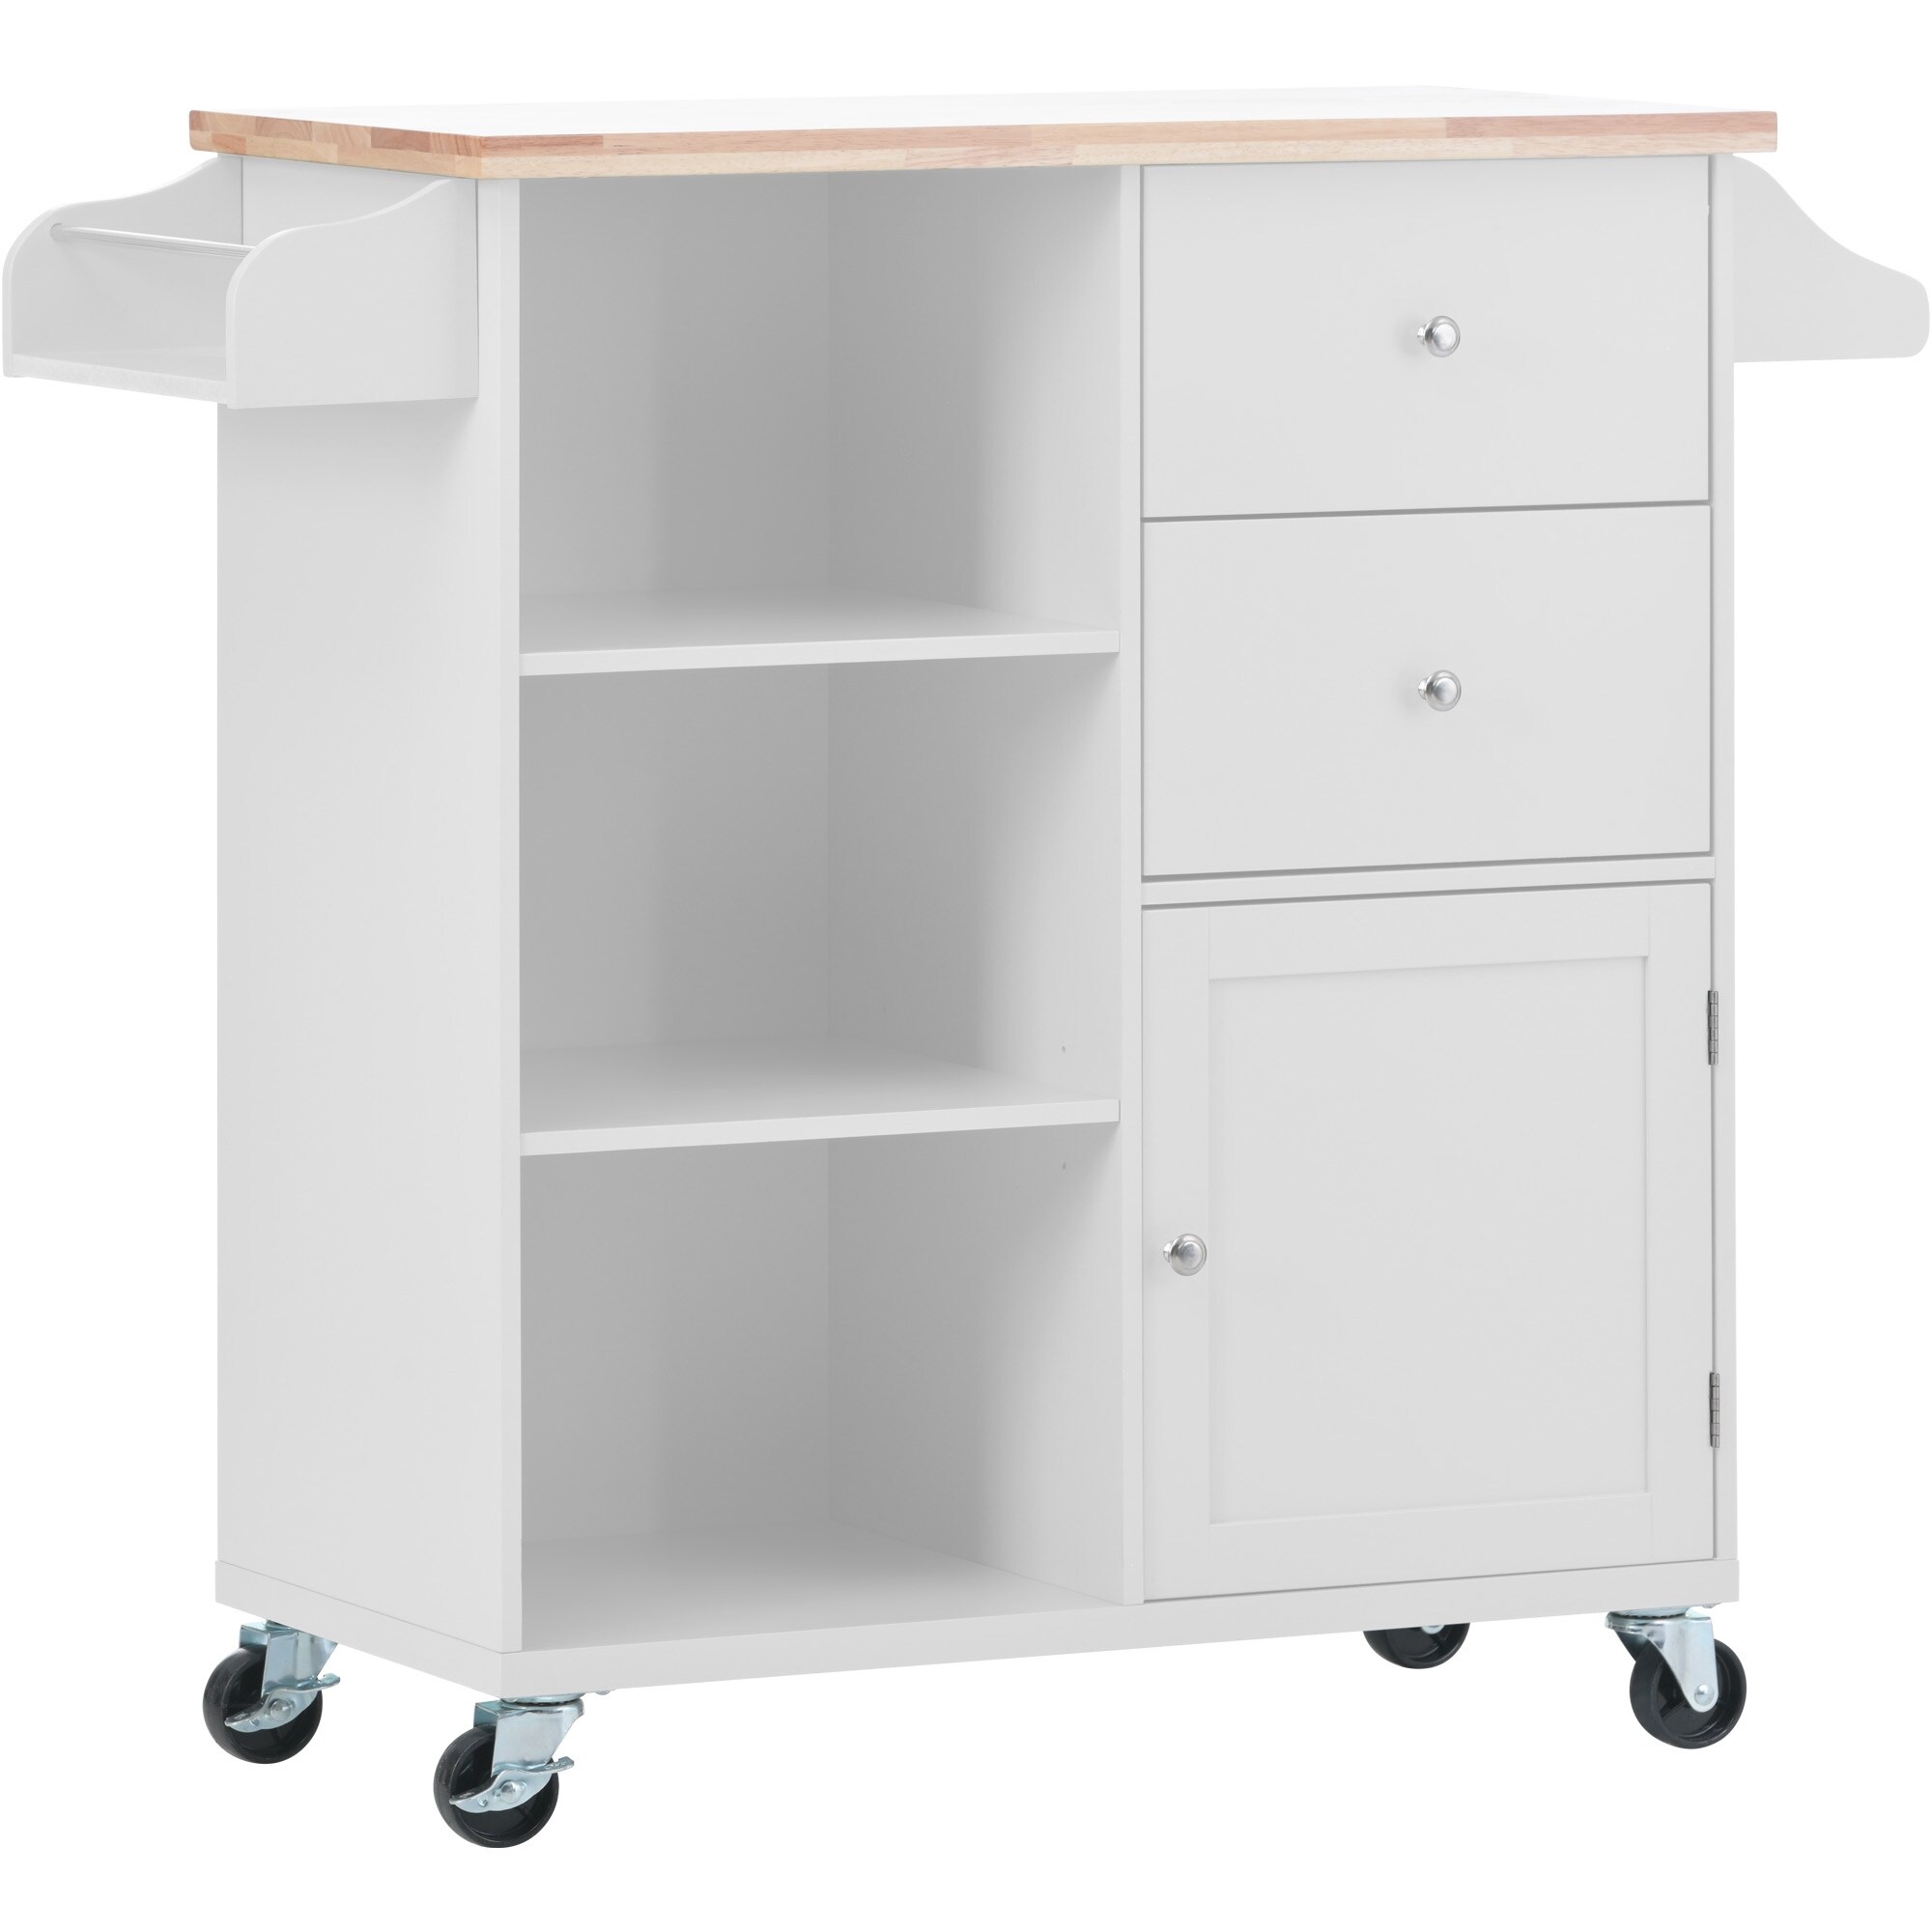 31.5"Wide Rolling Kitchen Cart with Solid Wood Top - Kitchen Cart